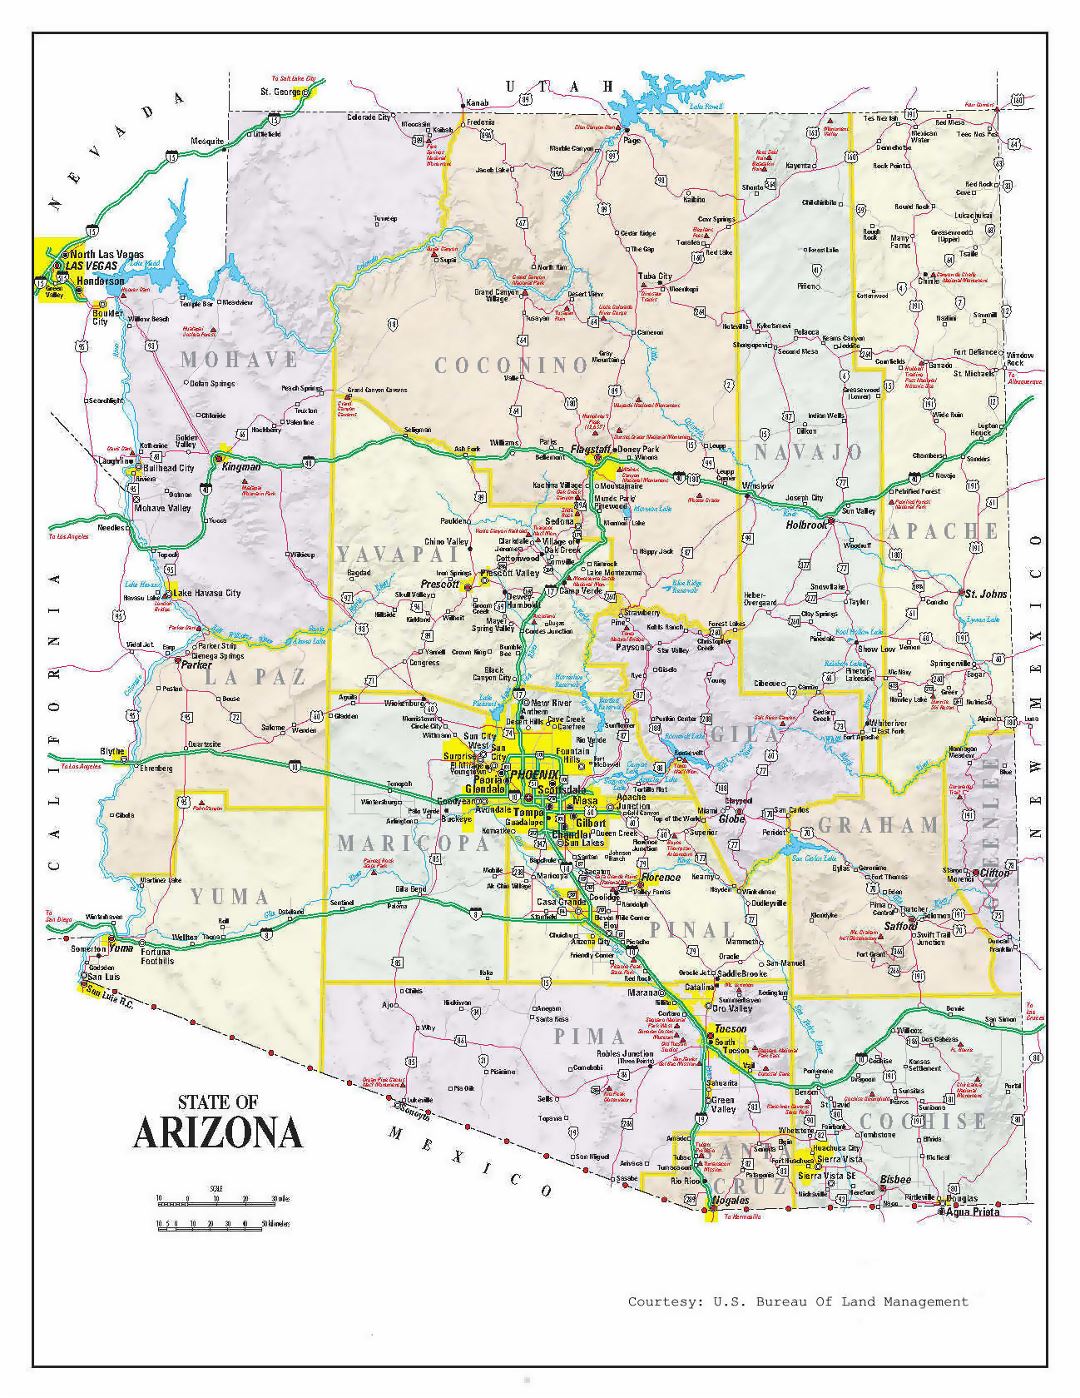 Administrative map of Arizona with roads and cities